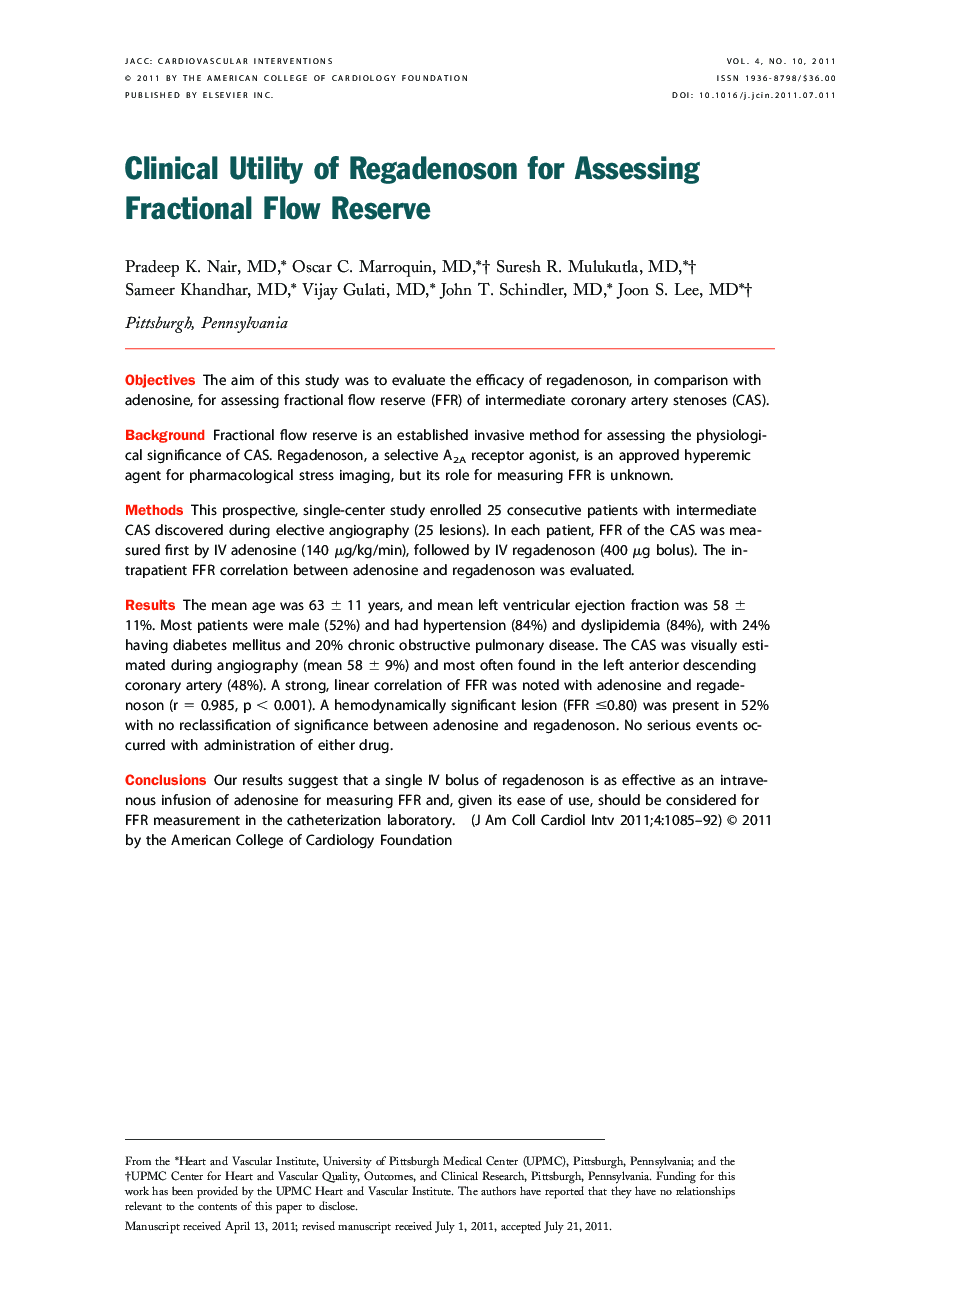 Clinical Utility of Regadenoson for Assessing Fractional Flow Reserve 